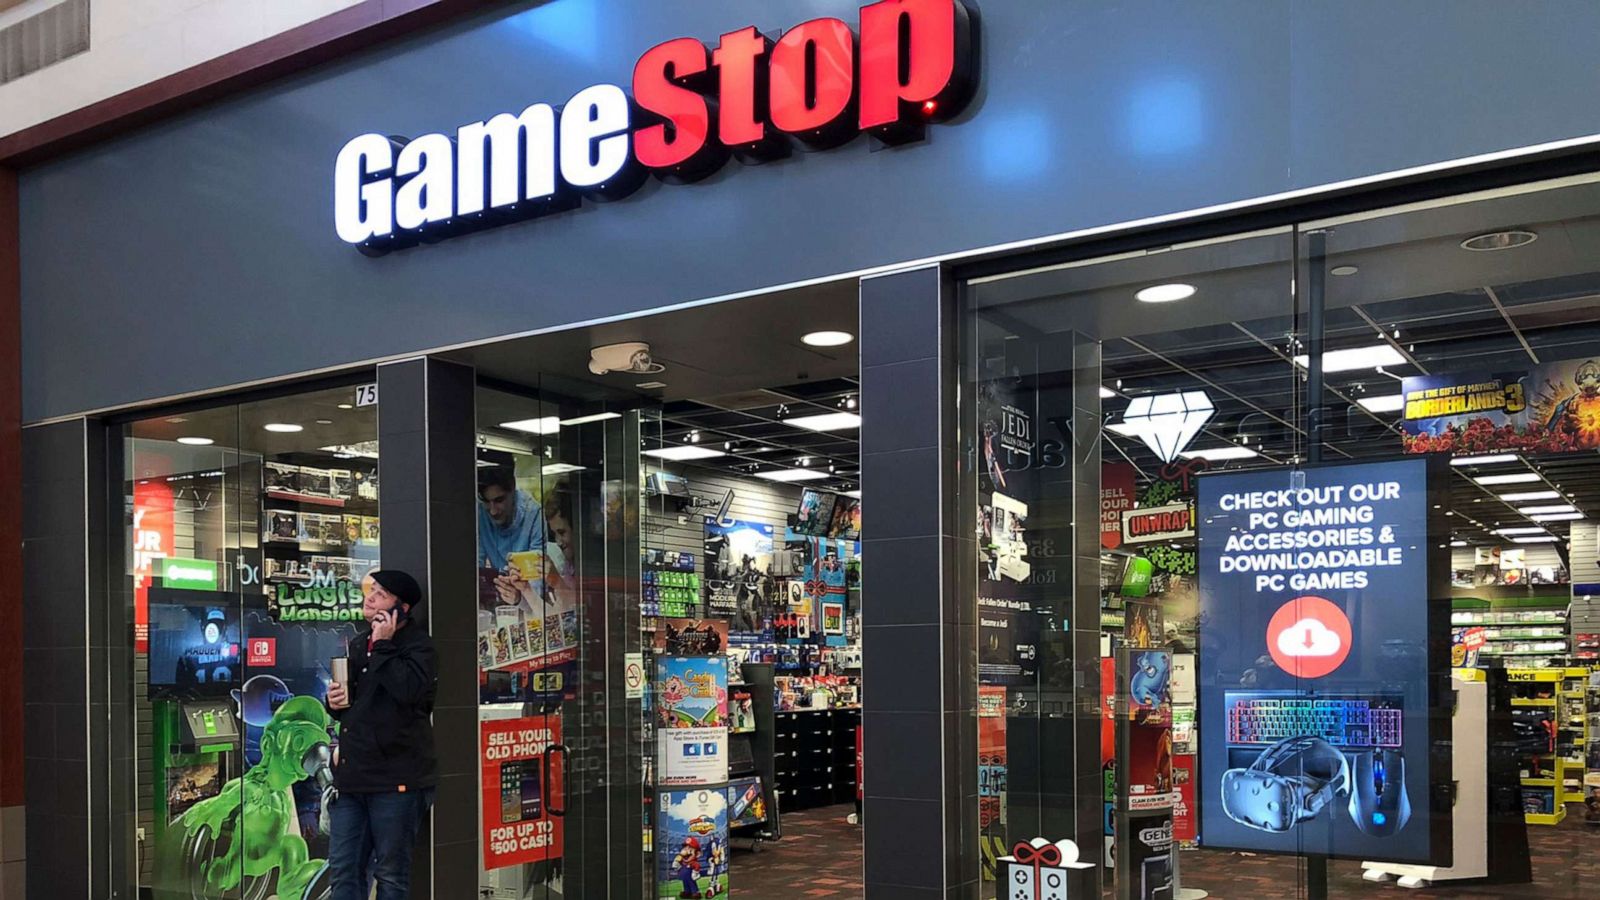 Robinhood abruptly restricts transactions for GameStop stock - ABC News